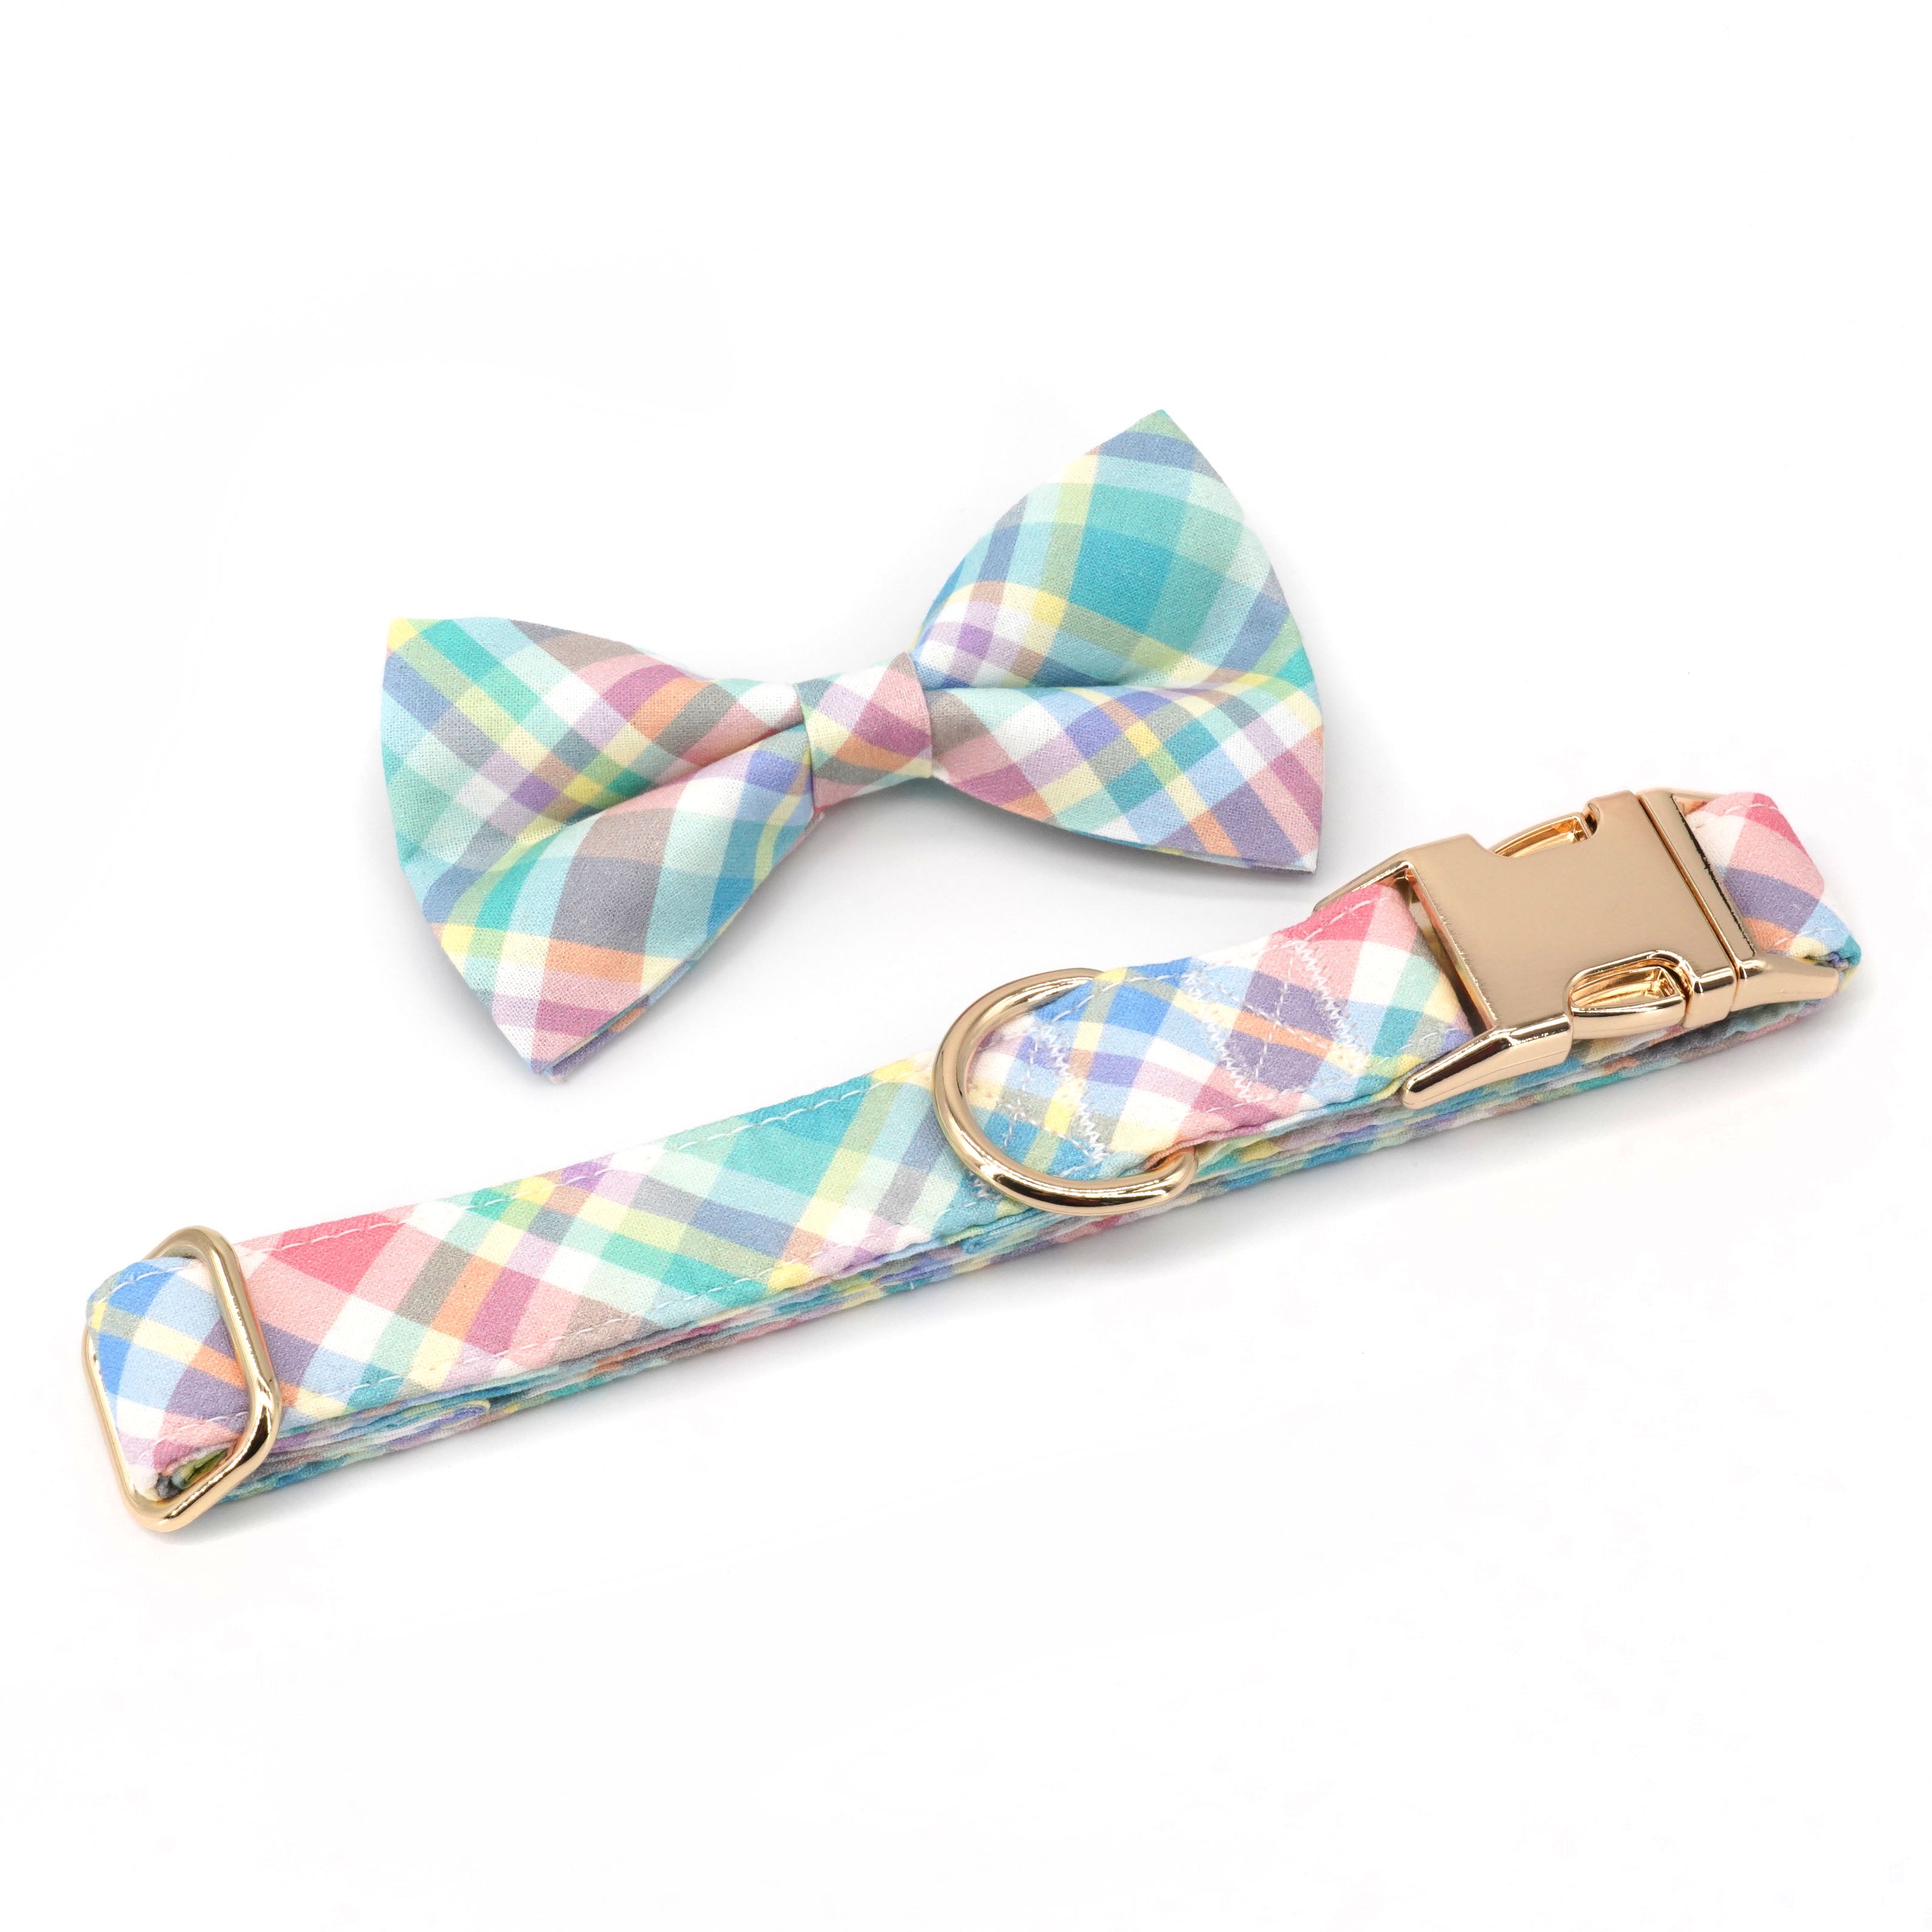 Summer Plaid Fashions: Personalized Collar And Leash - CurliTail